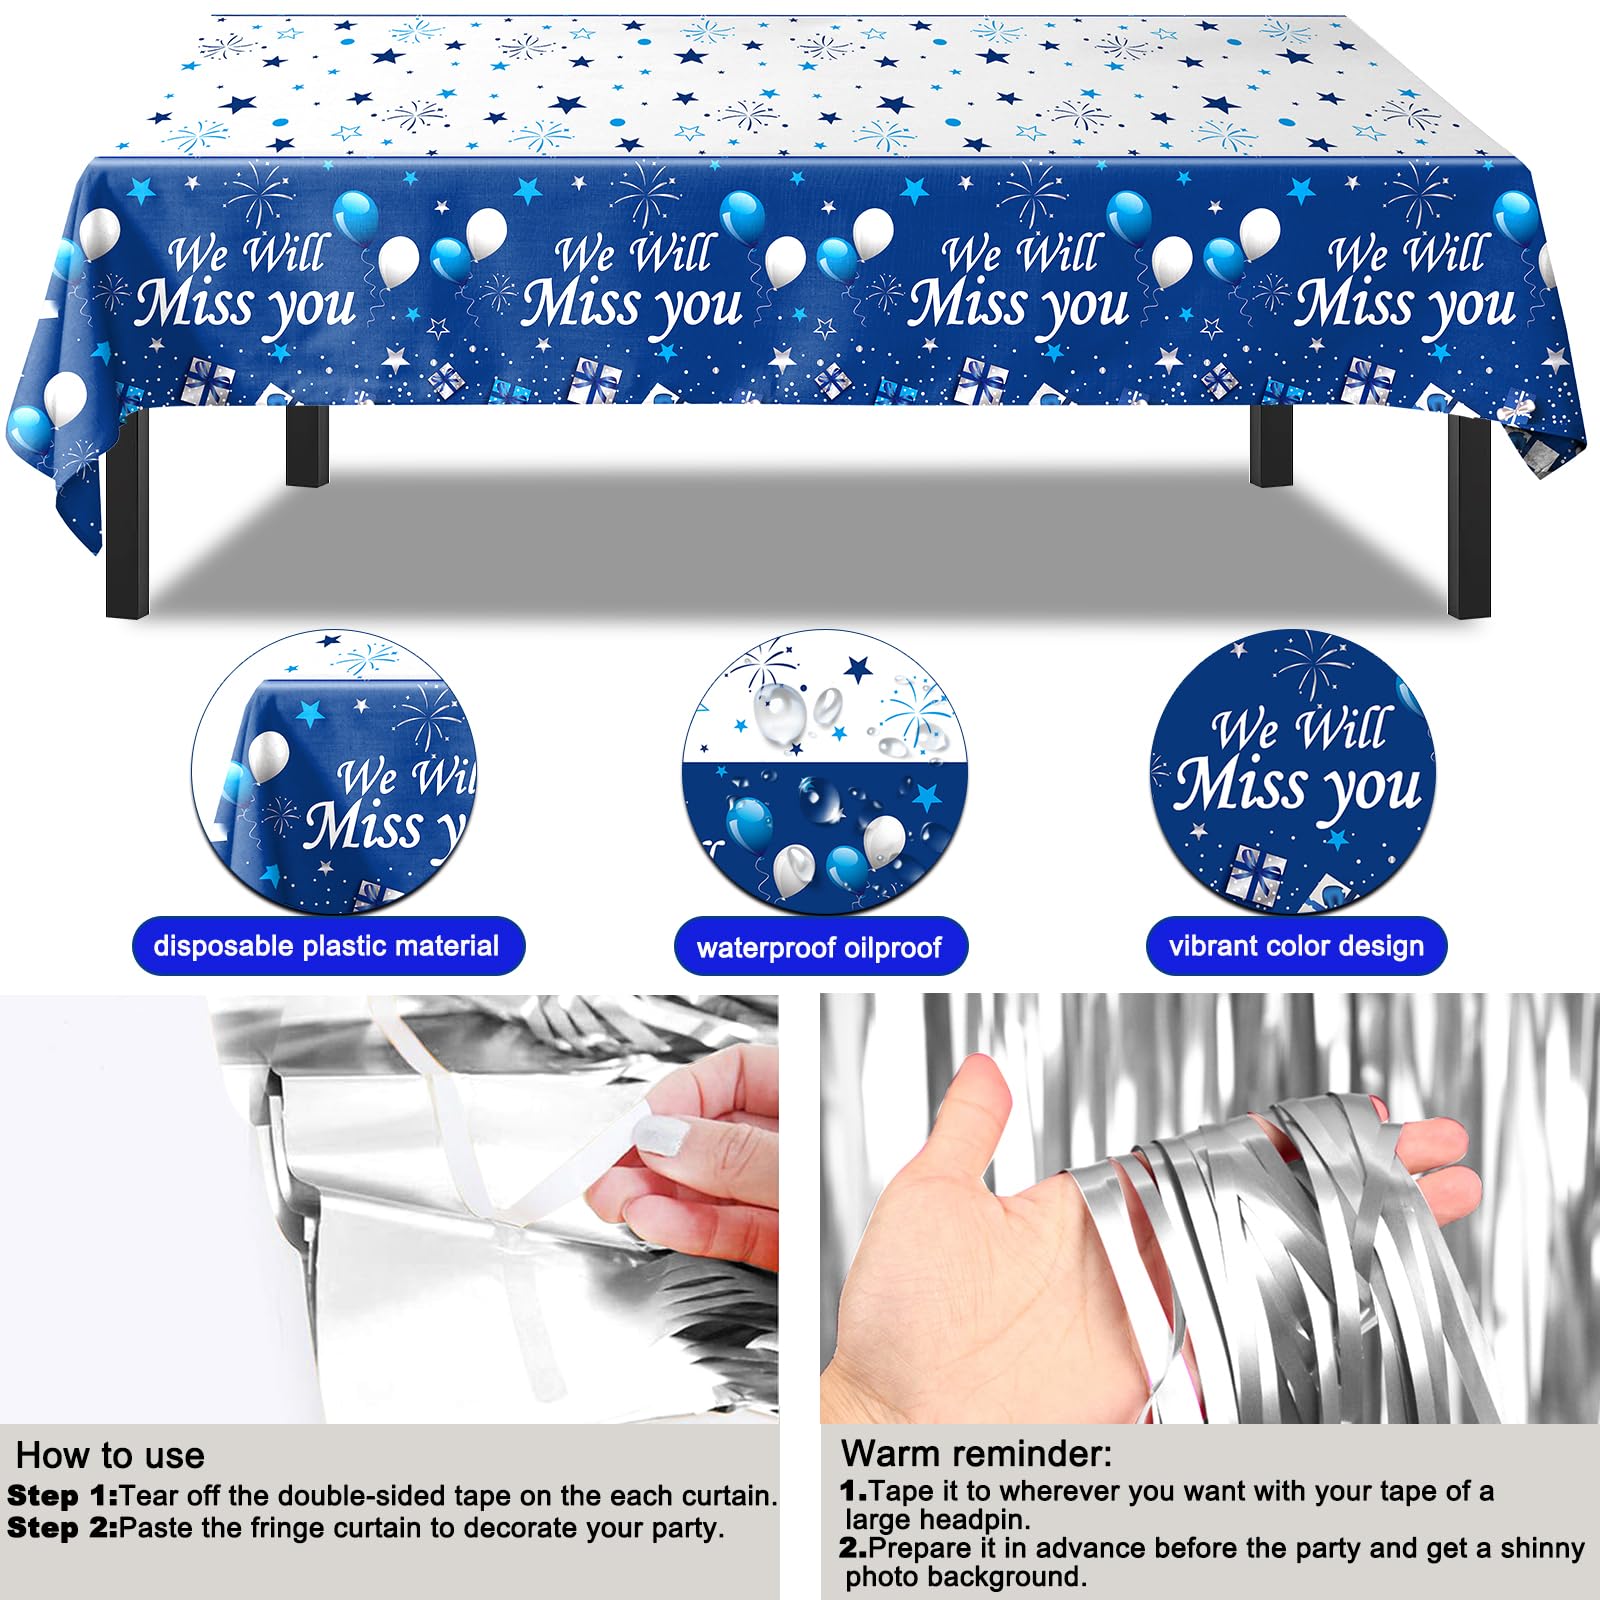 Farewell Party Decorations for Men Women,We Will Miss You Decorations Banner Navy Blue Silver Going Away Party Decorations Balloons Tablecloth for Coworker Retirement Job Change Goodbye Party Supplies